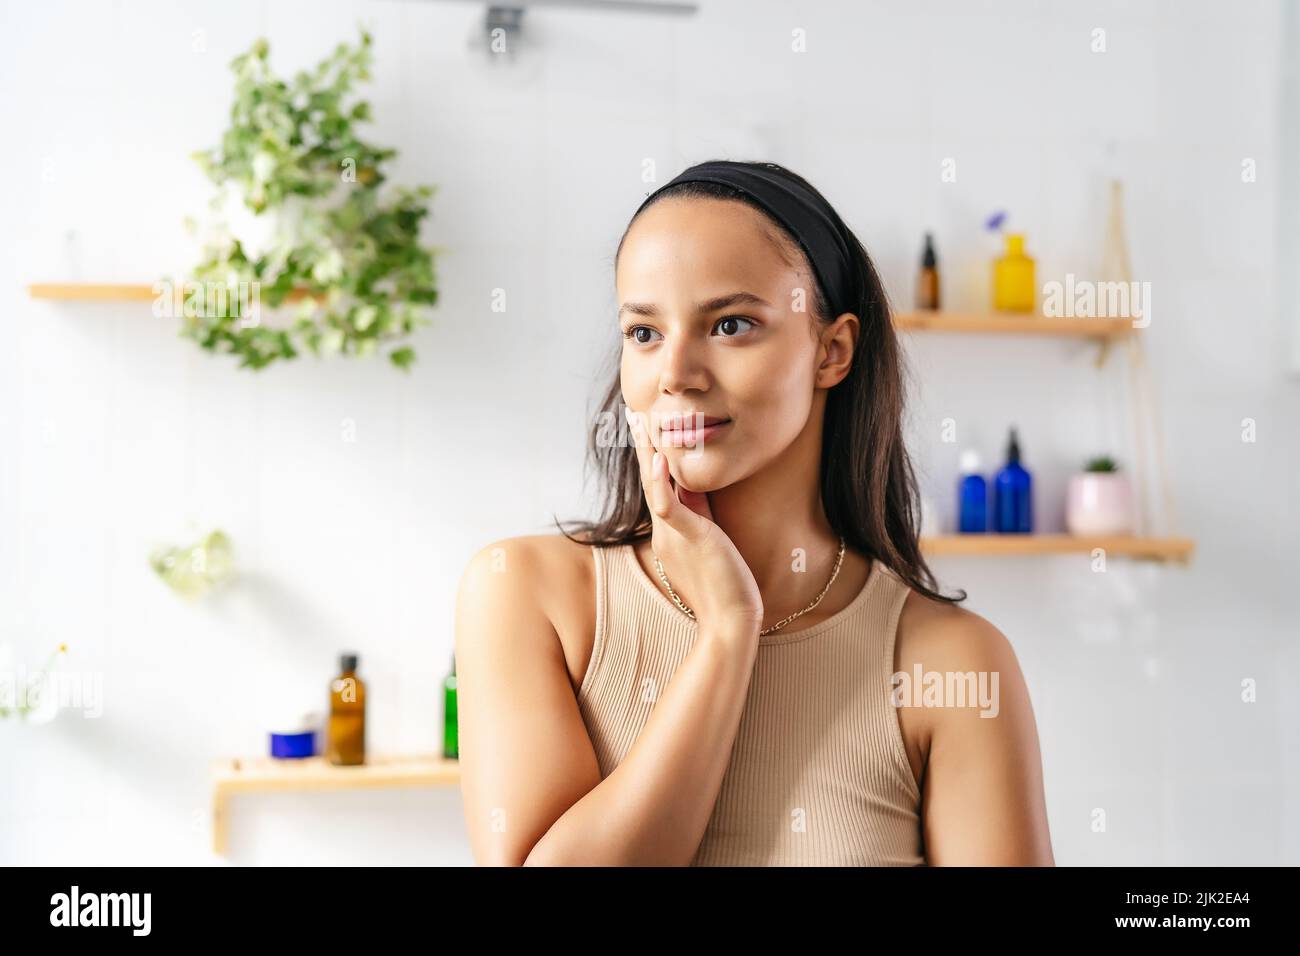 Beautiful hispanic brunette portrait against white tiled wall with cosmetics. Wellness and natural cosmetics Stock Photo